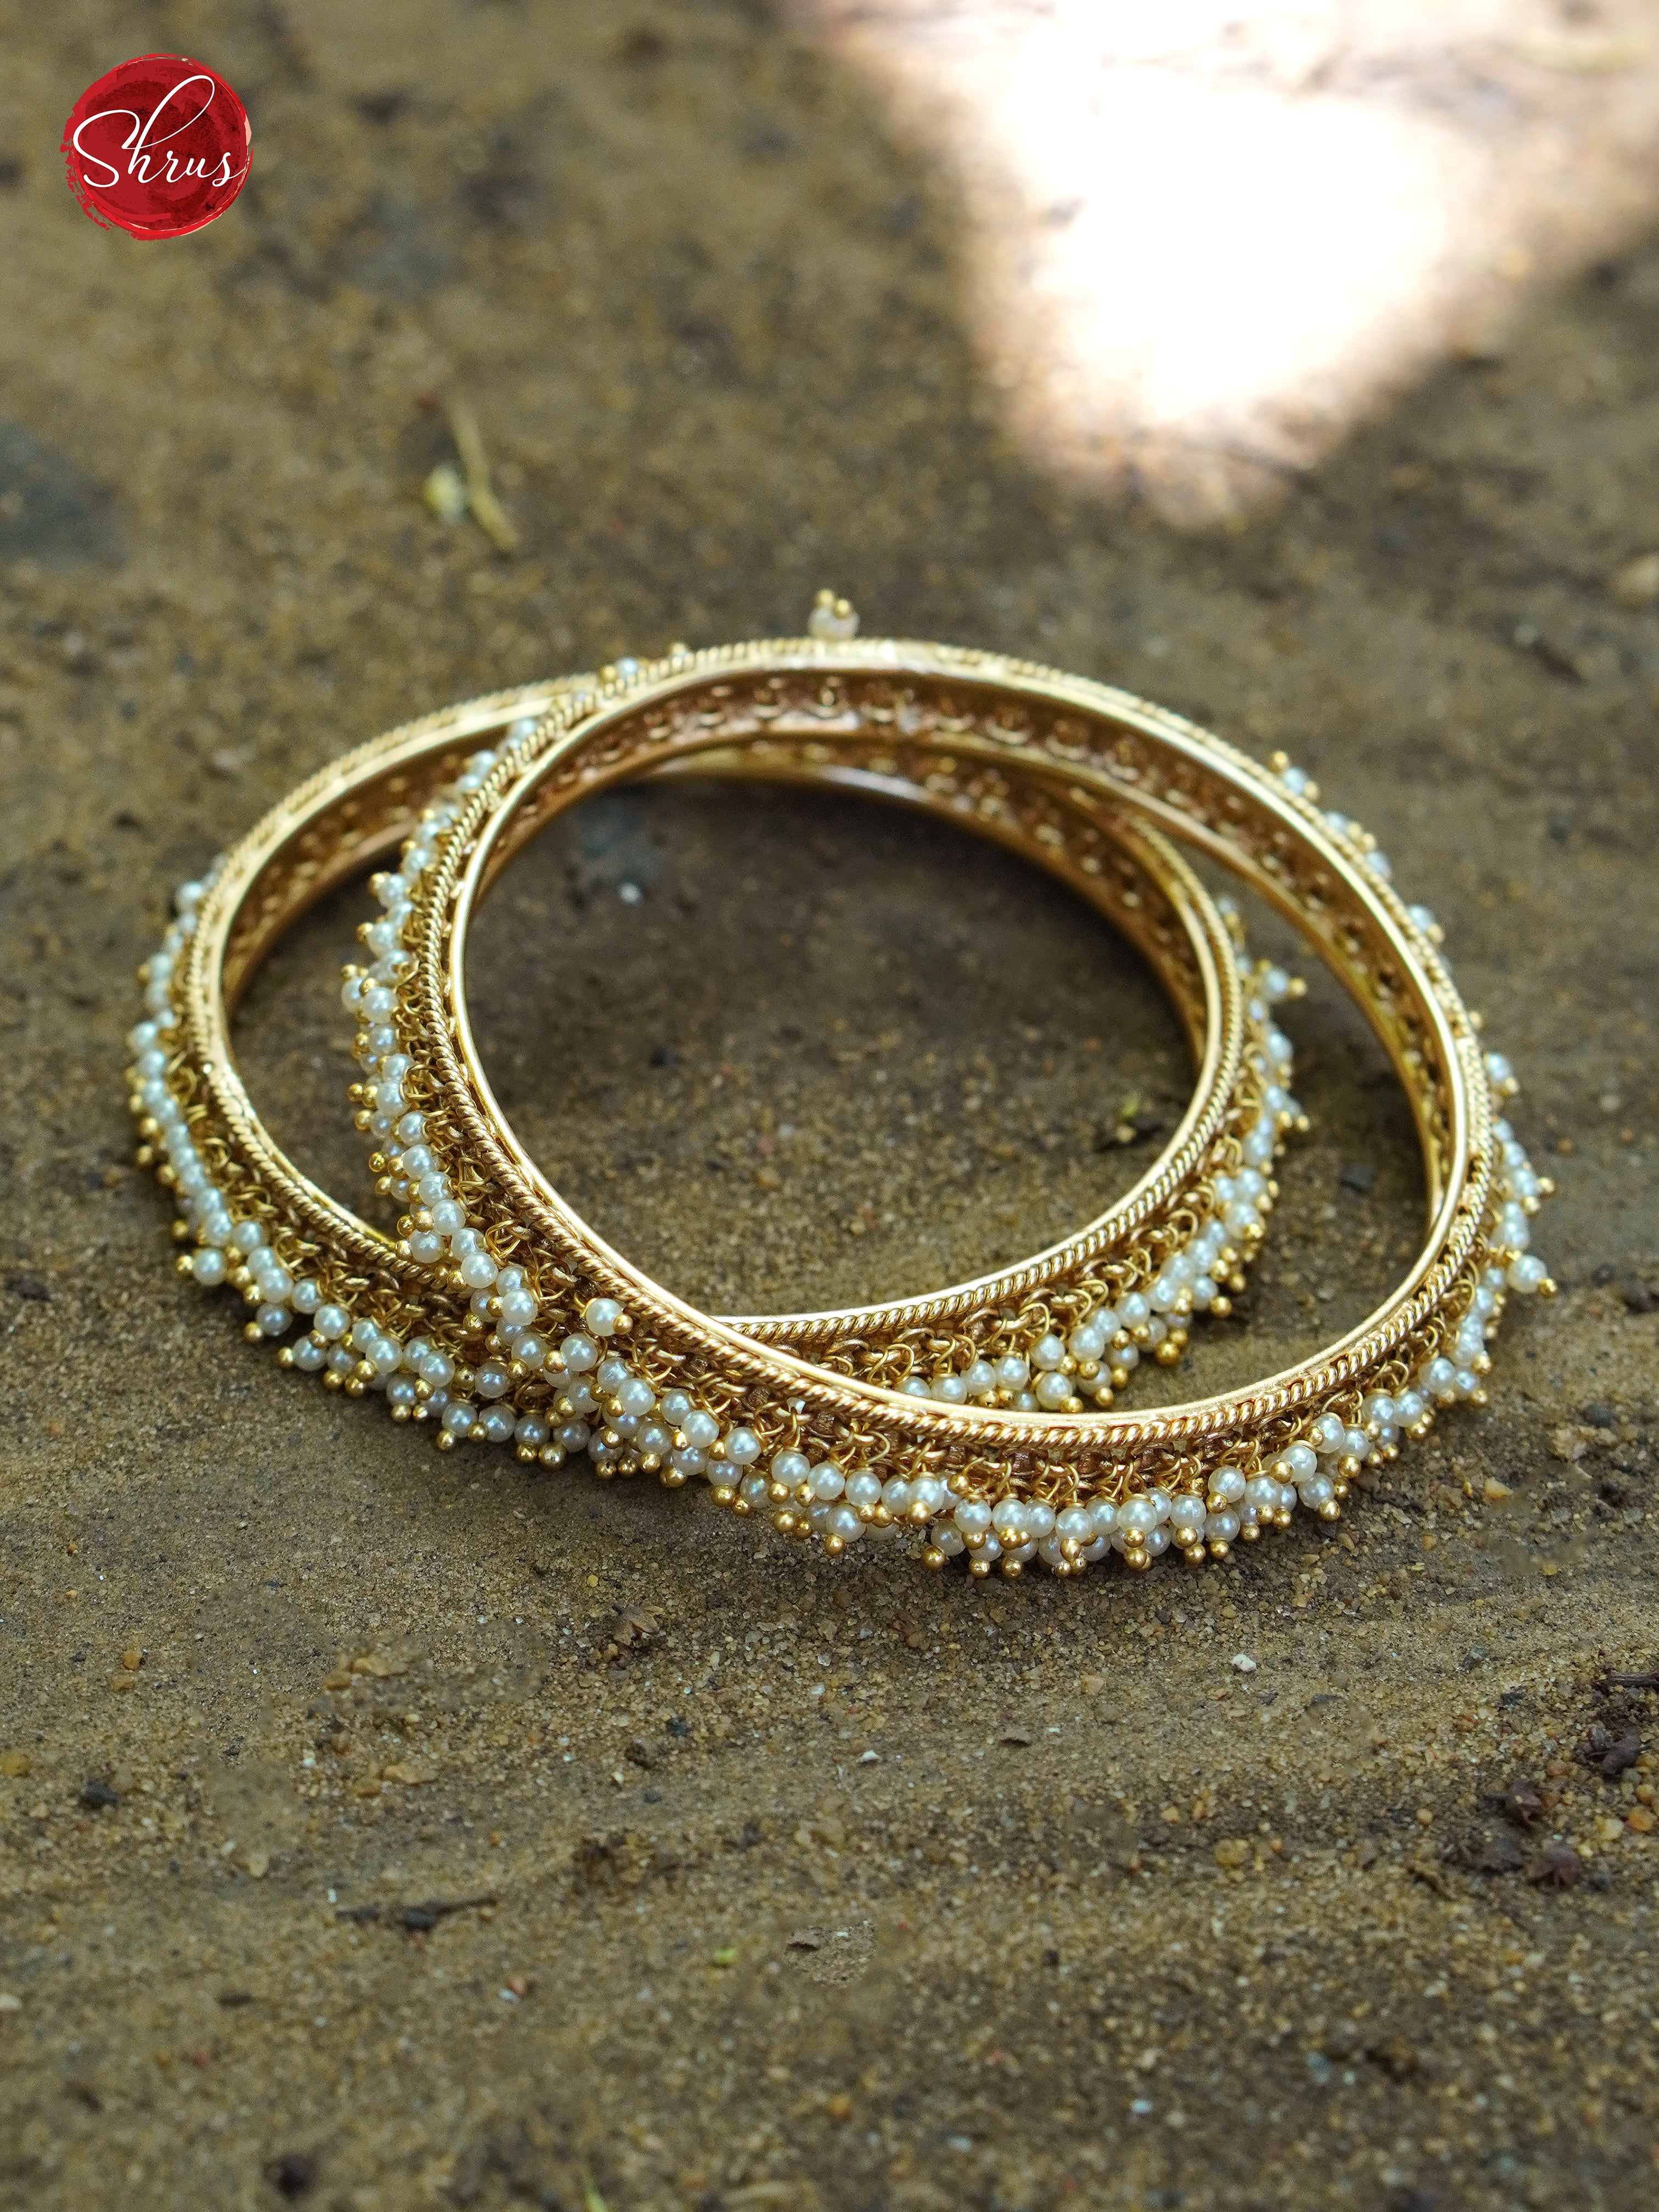 White Beads Bangles - Accessories